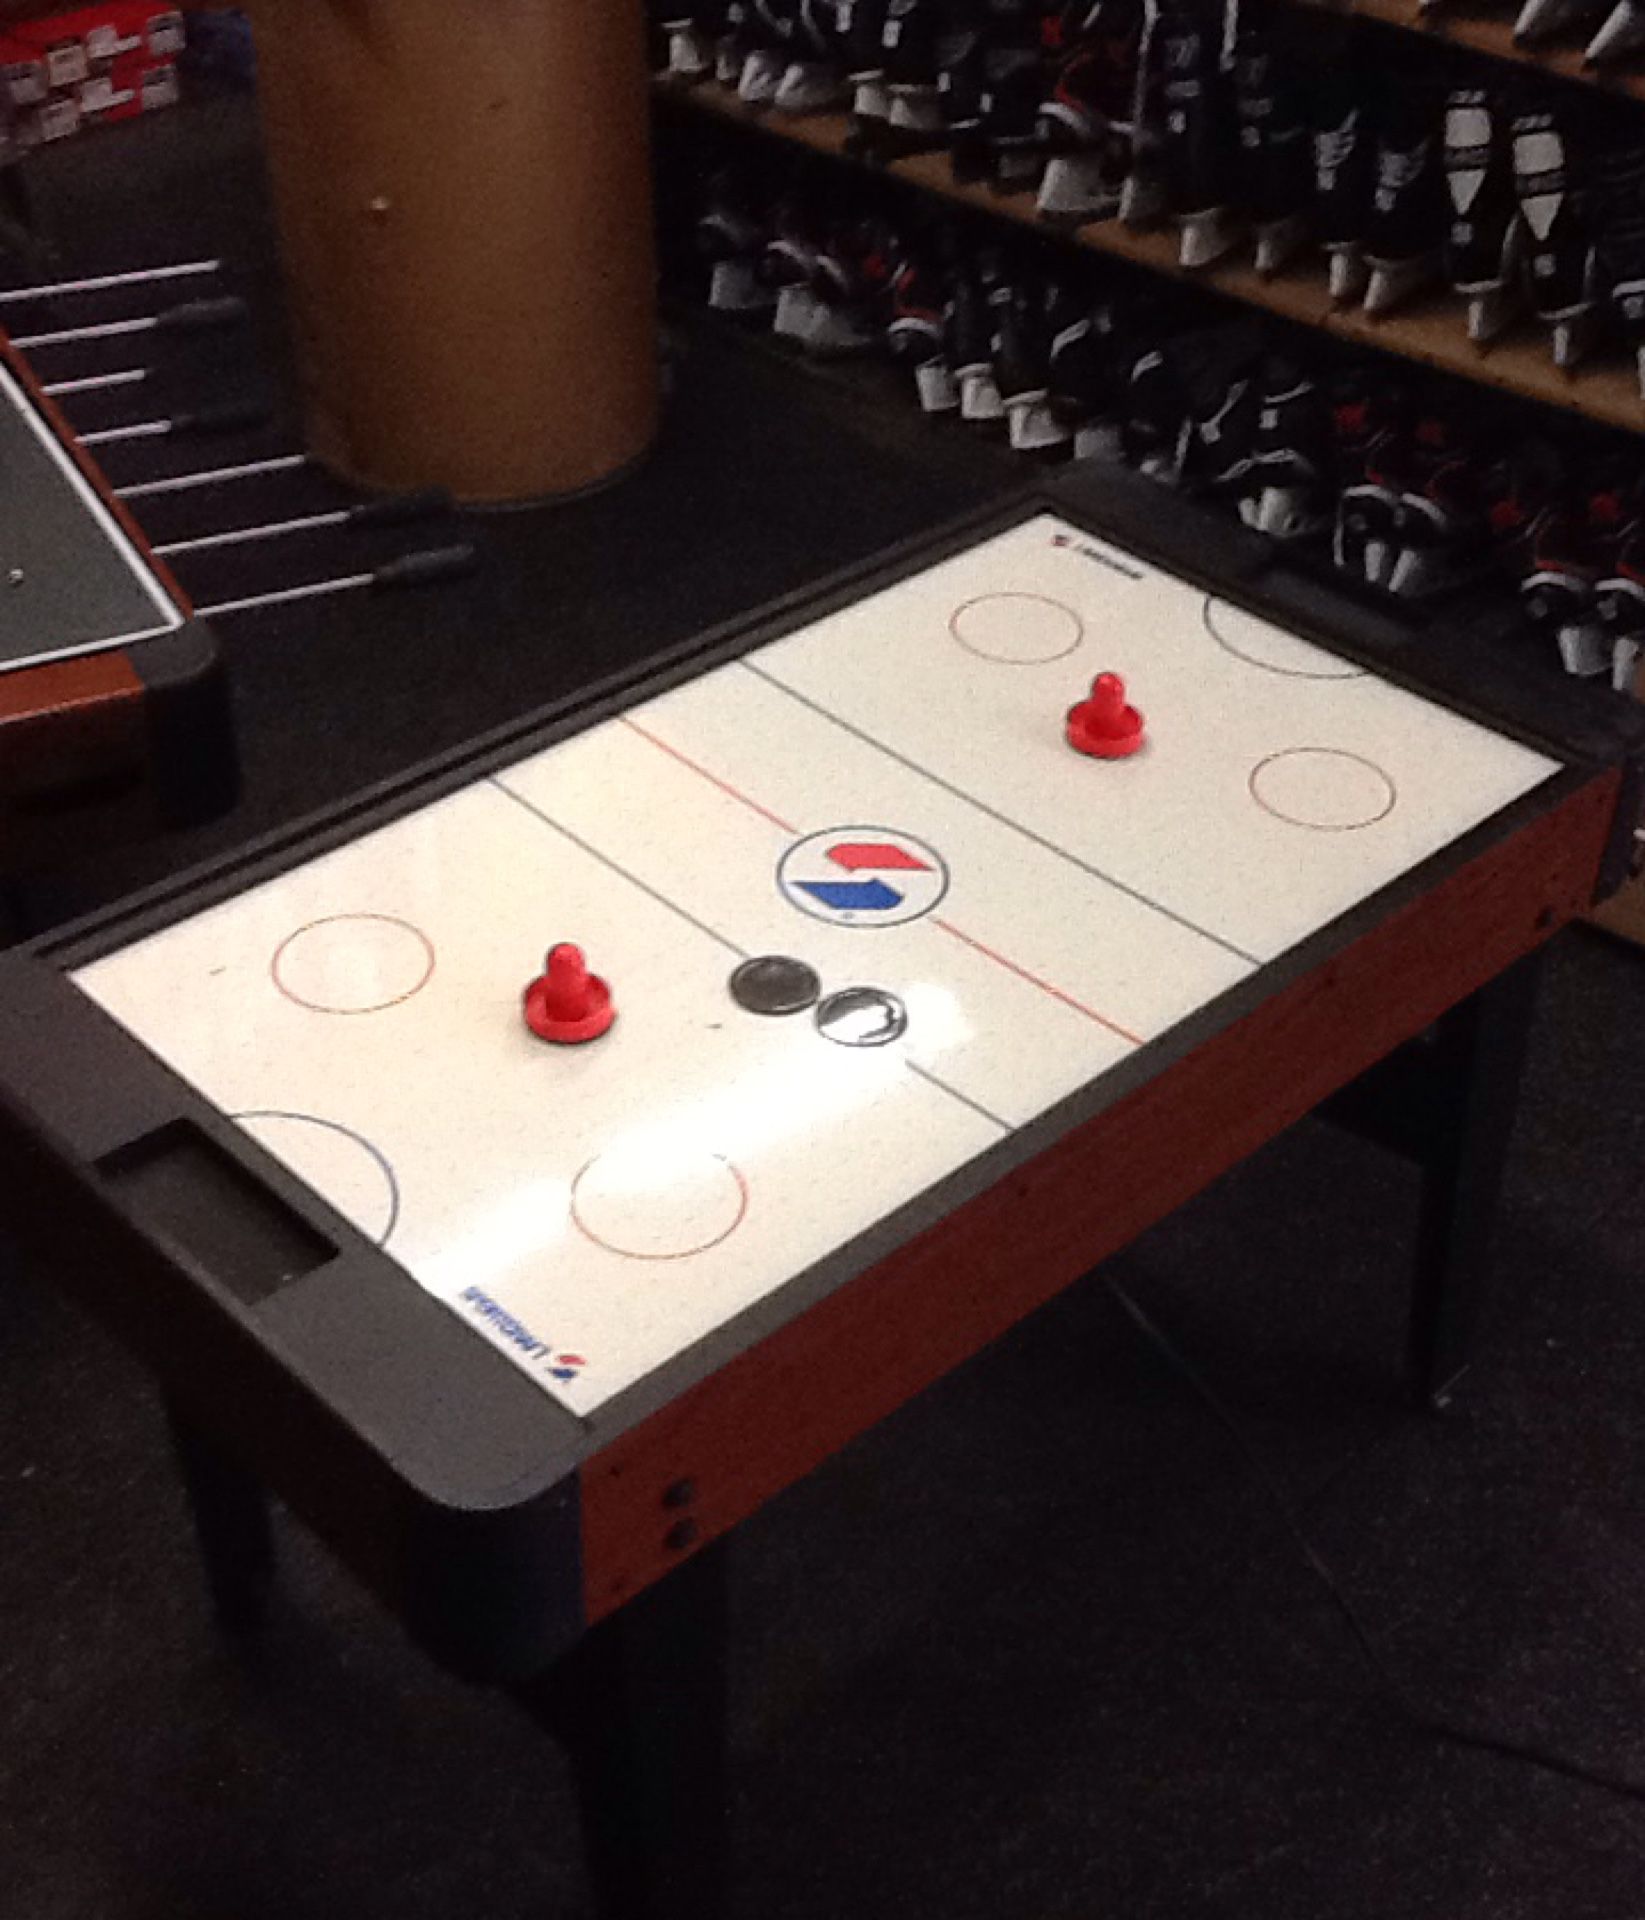 Sportcraft 9 in 1 Air Hockey, Ping Pong, Checkers, Chess, Backgammon, Cards, Shuffle, Bowling, & Foosball Table